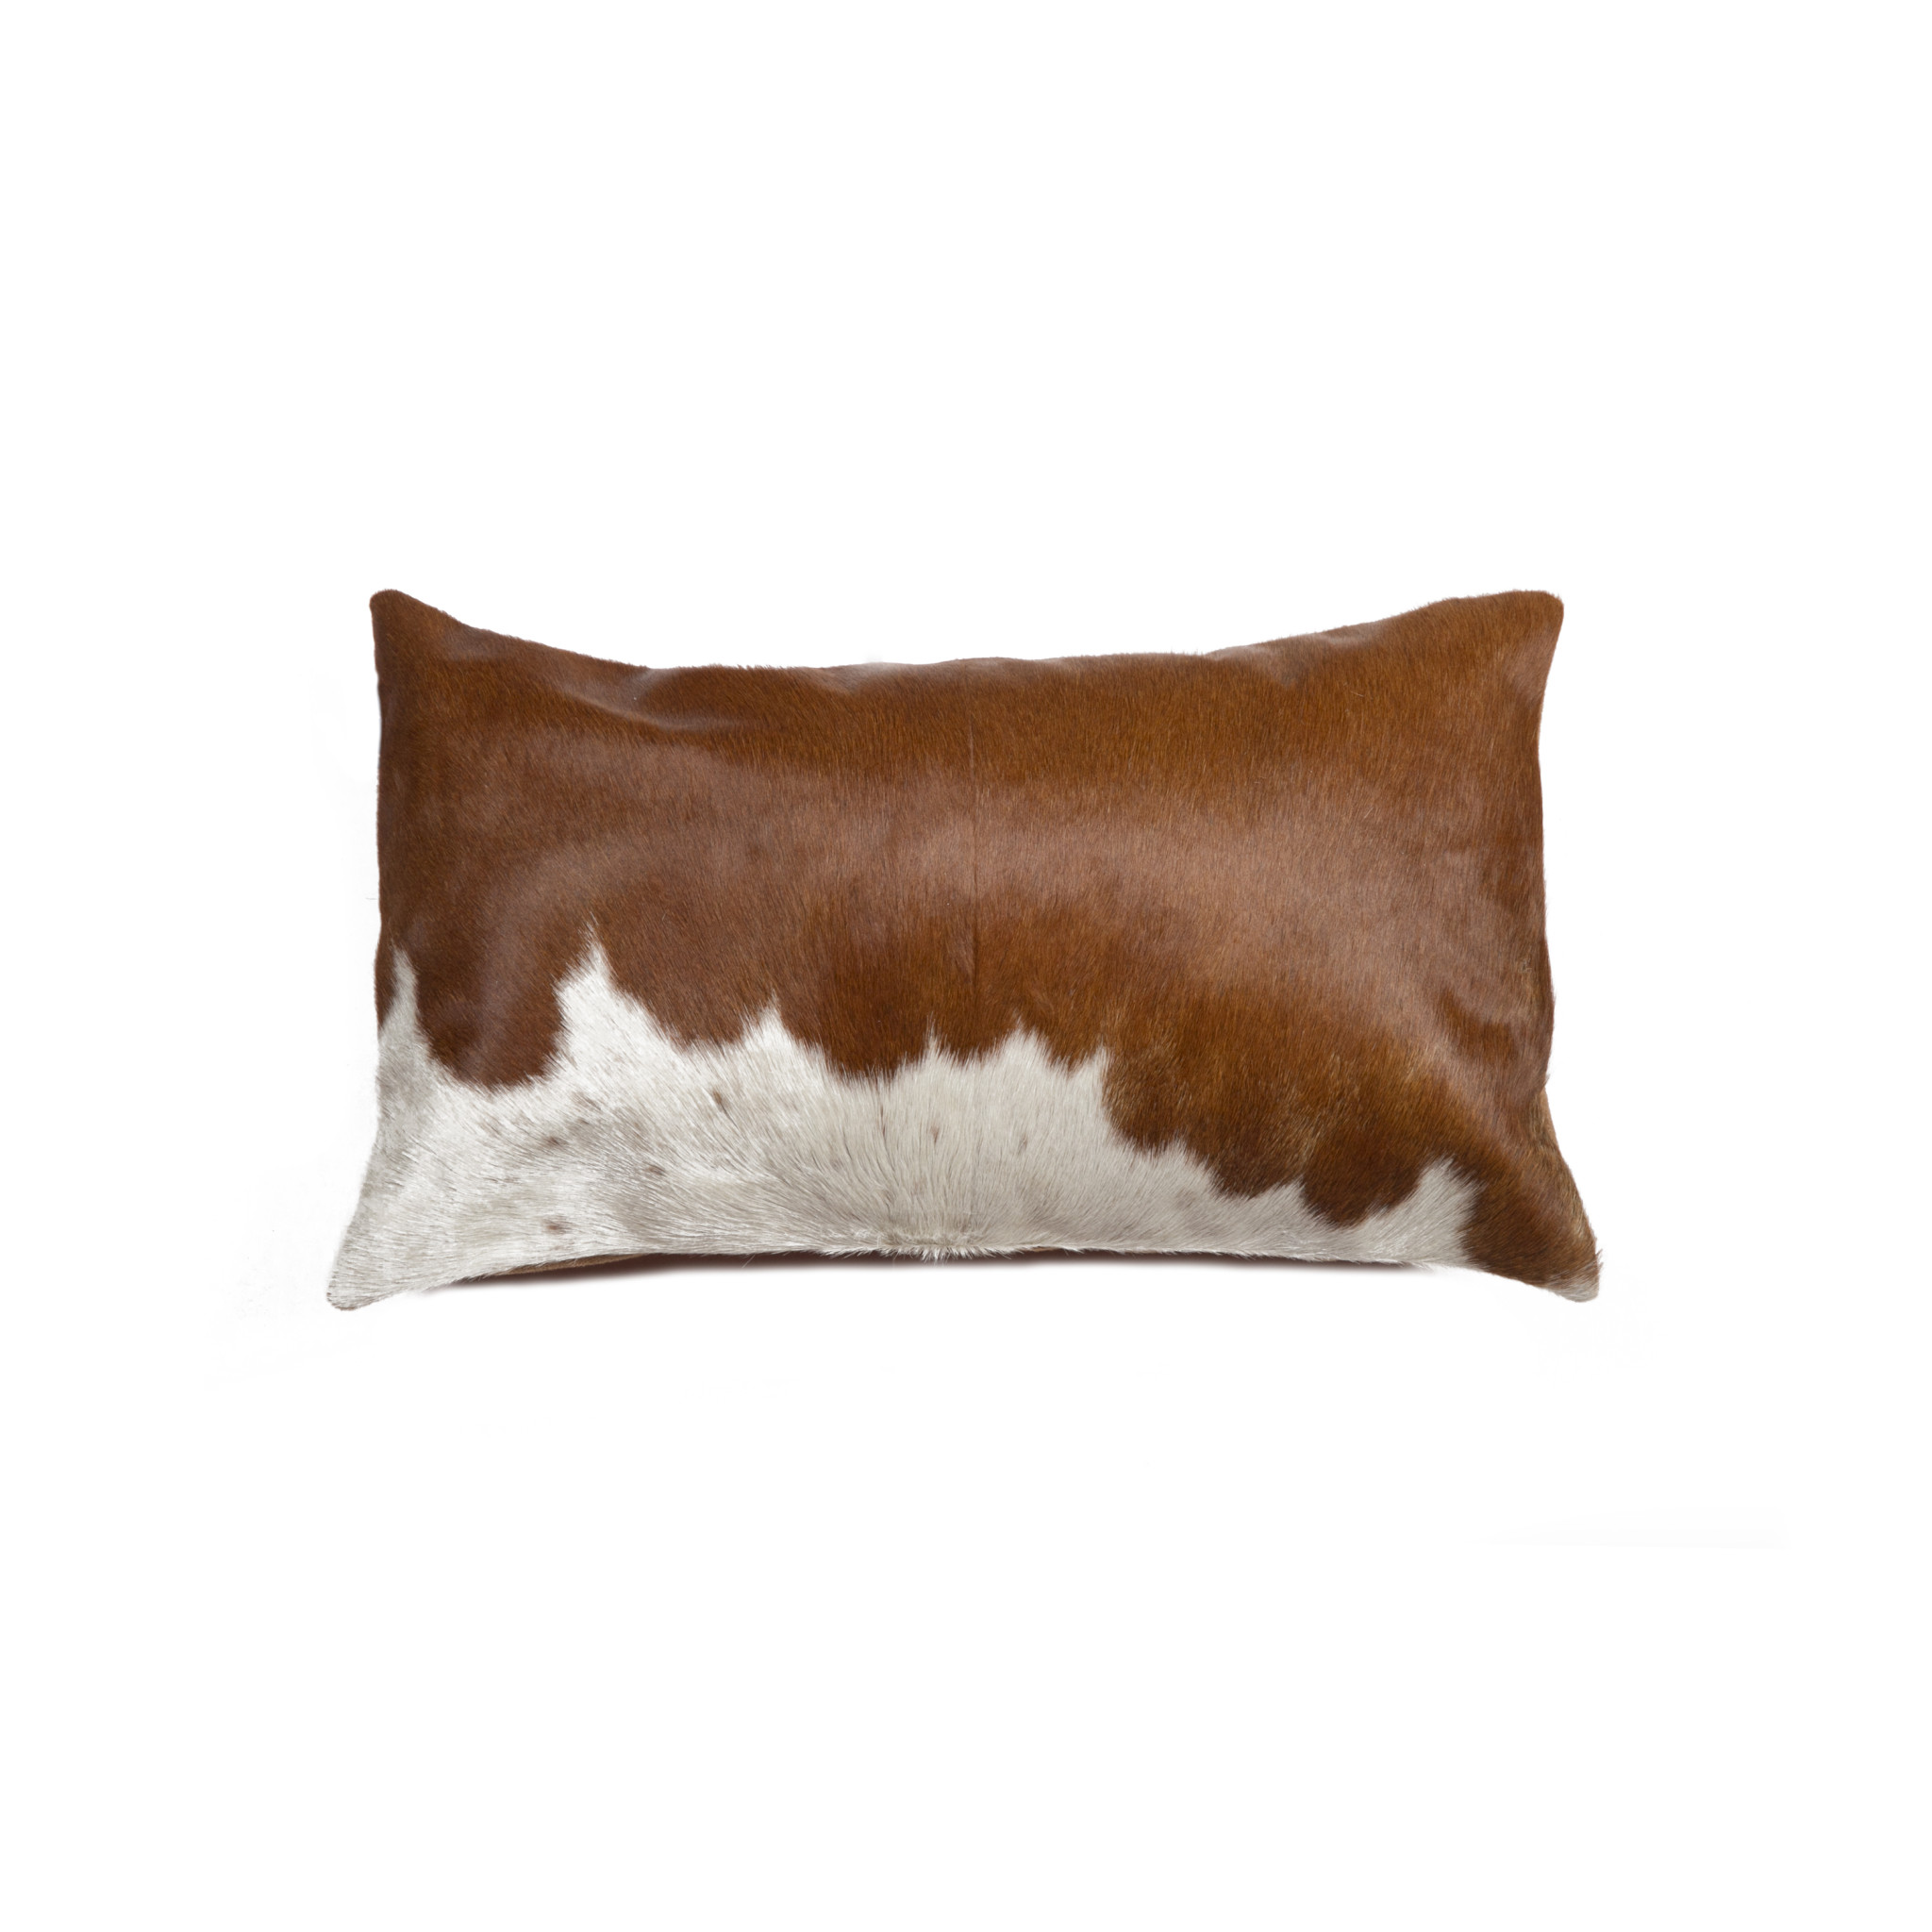 20" X 5" Brown and White Cowhide Zippered Pillow-294273-1